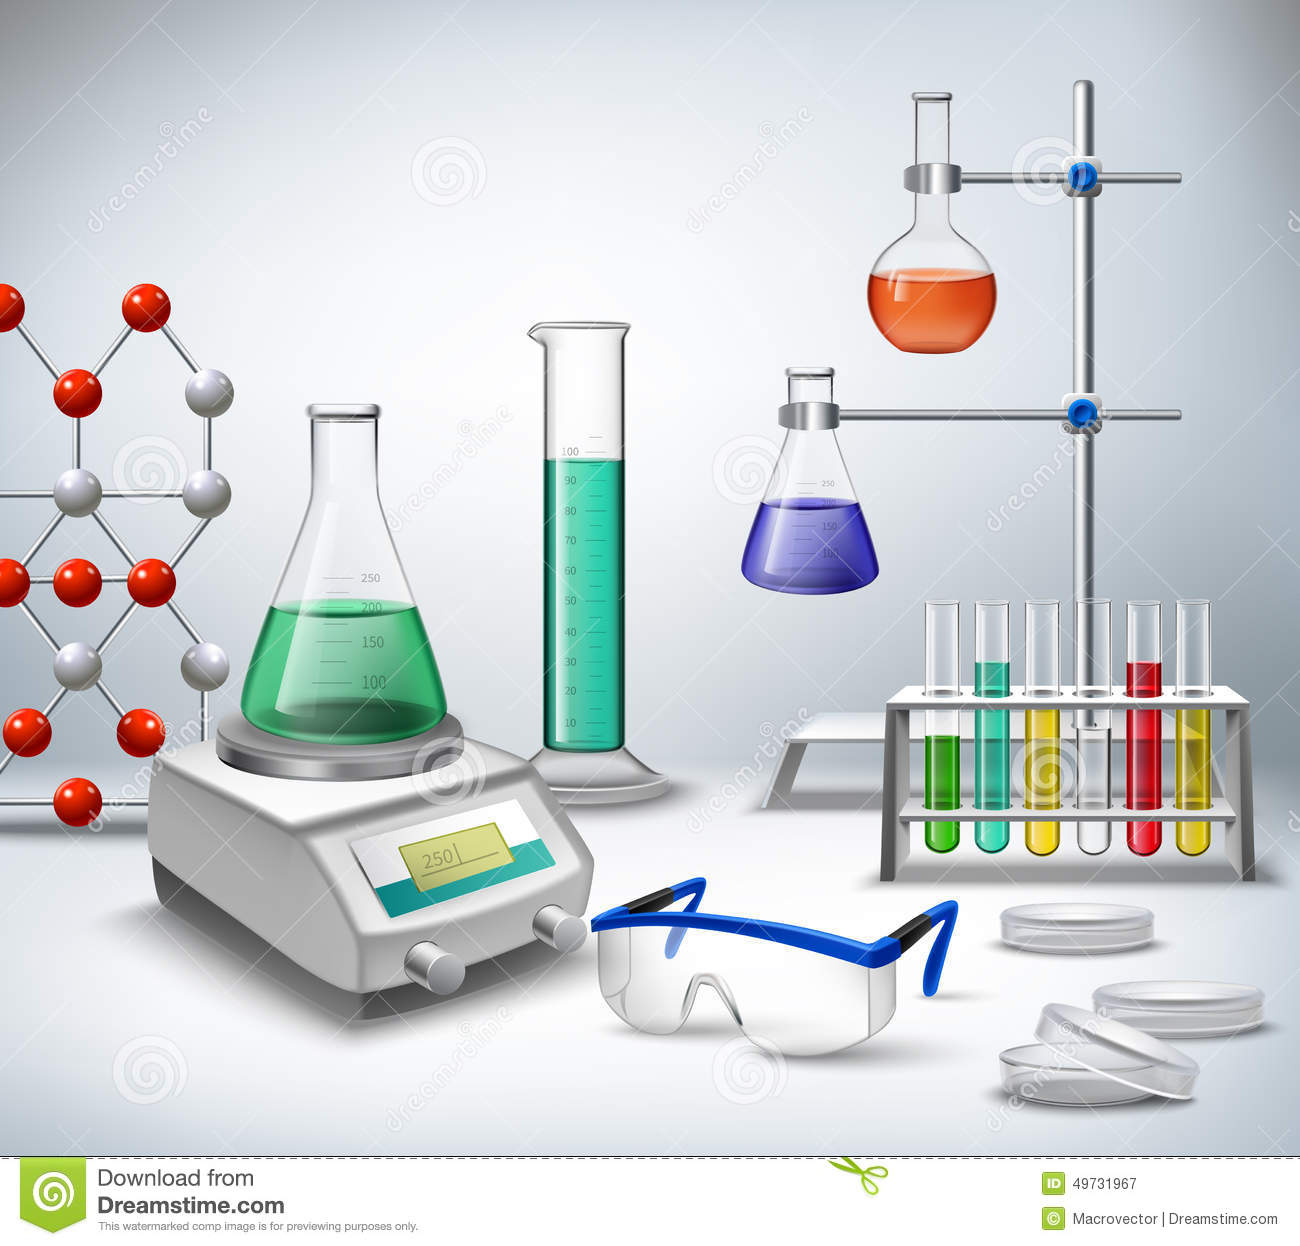 science-lab-background-chemical-medical-research-equipment-realistic-vector-illustration-49731967  - Asianmedic